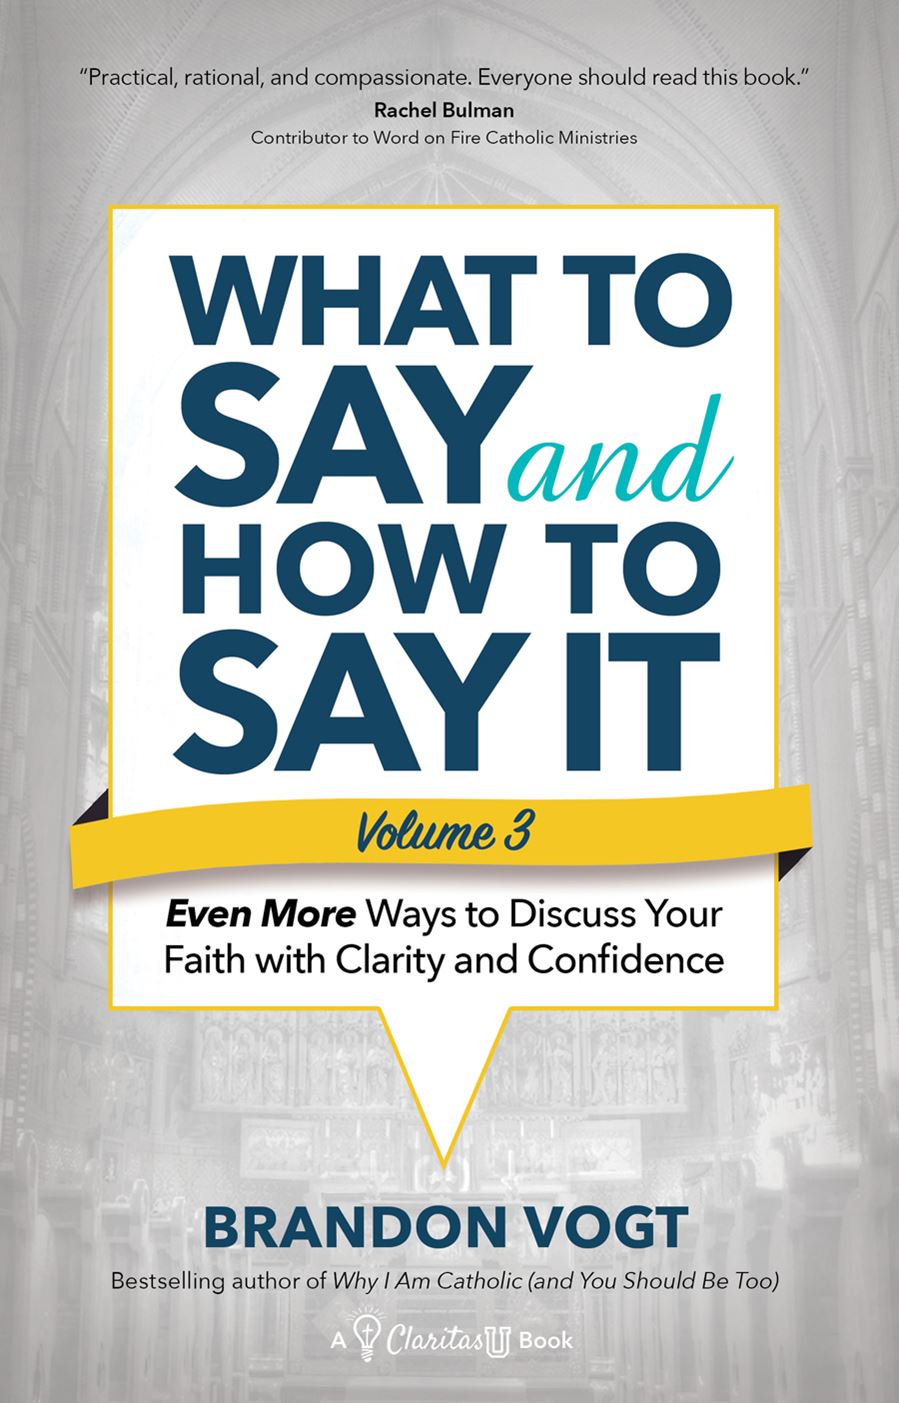 What to Say and How to Say It, Volume III Even More Ways to Discuss Your Faith with Clarity and Confidence Author: Brandon Vogt